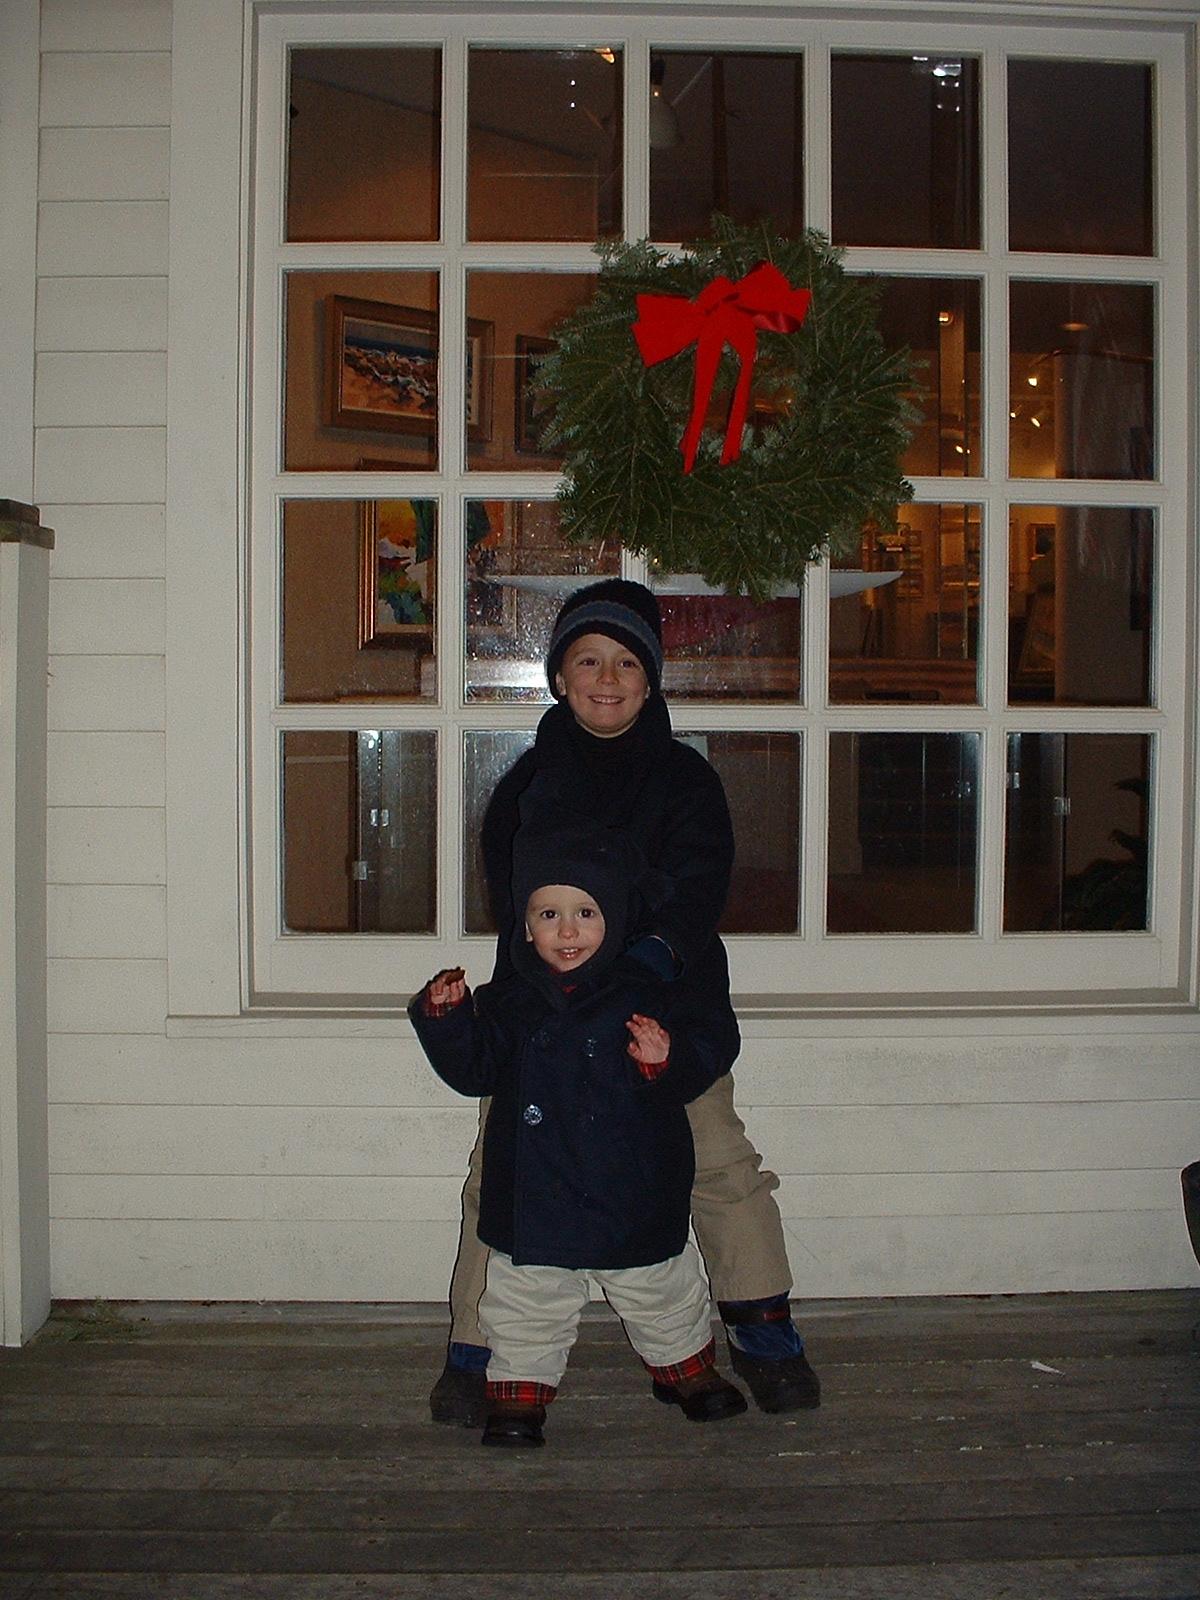 Grayson and Granger Christmas in Mystic CT. 2003